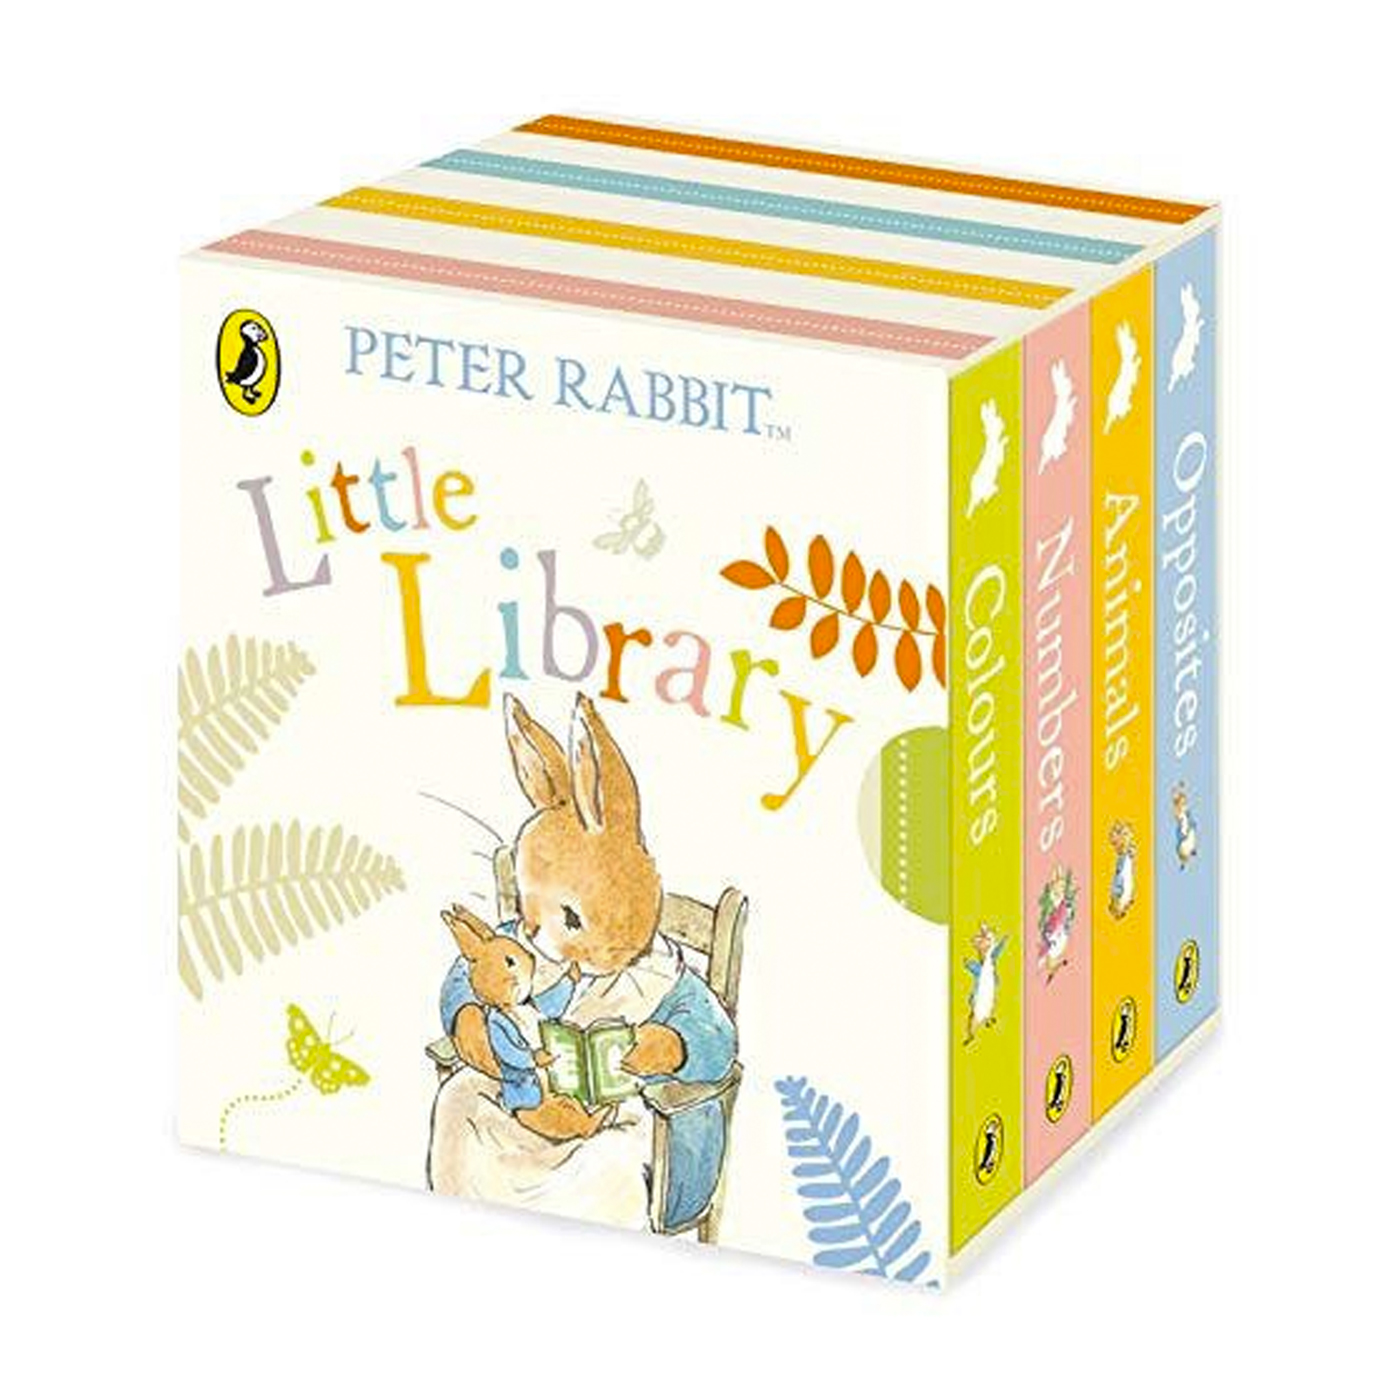  Peter Rabbit Tales: Little Library